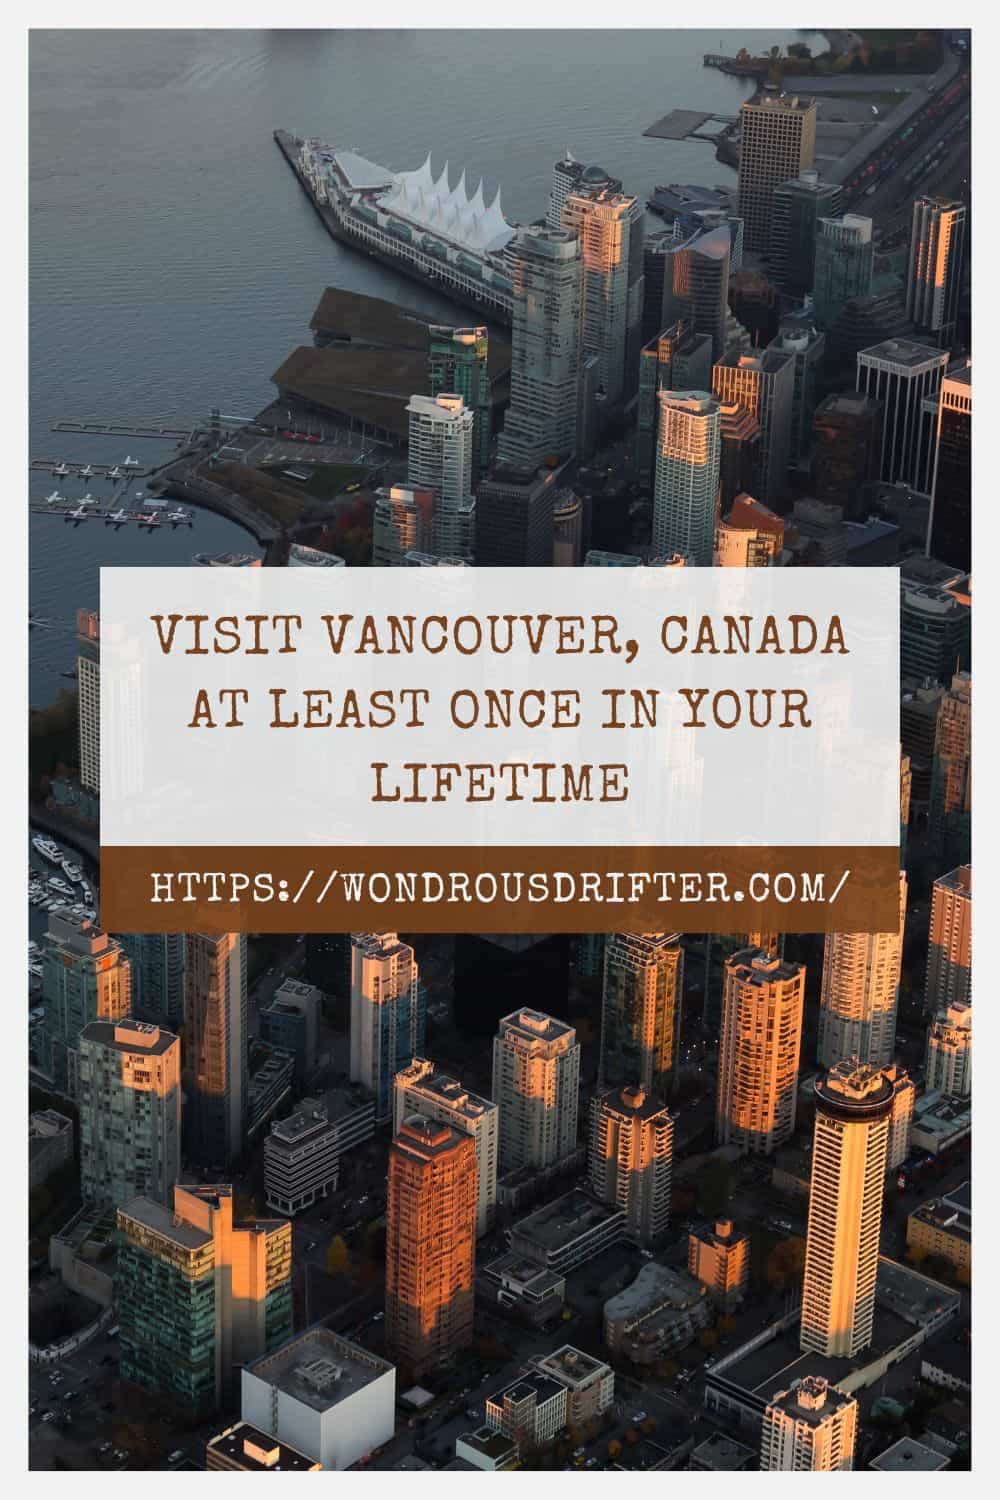 Visit Vancouver Canada at least oince in your lifetime